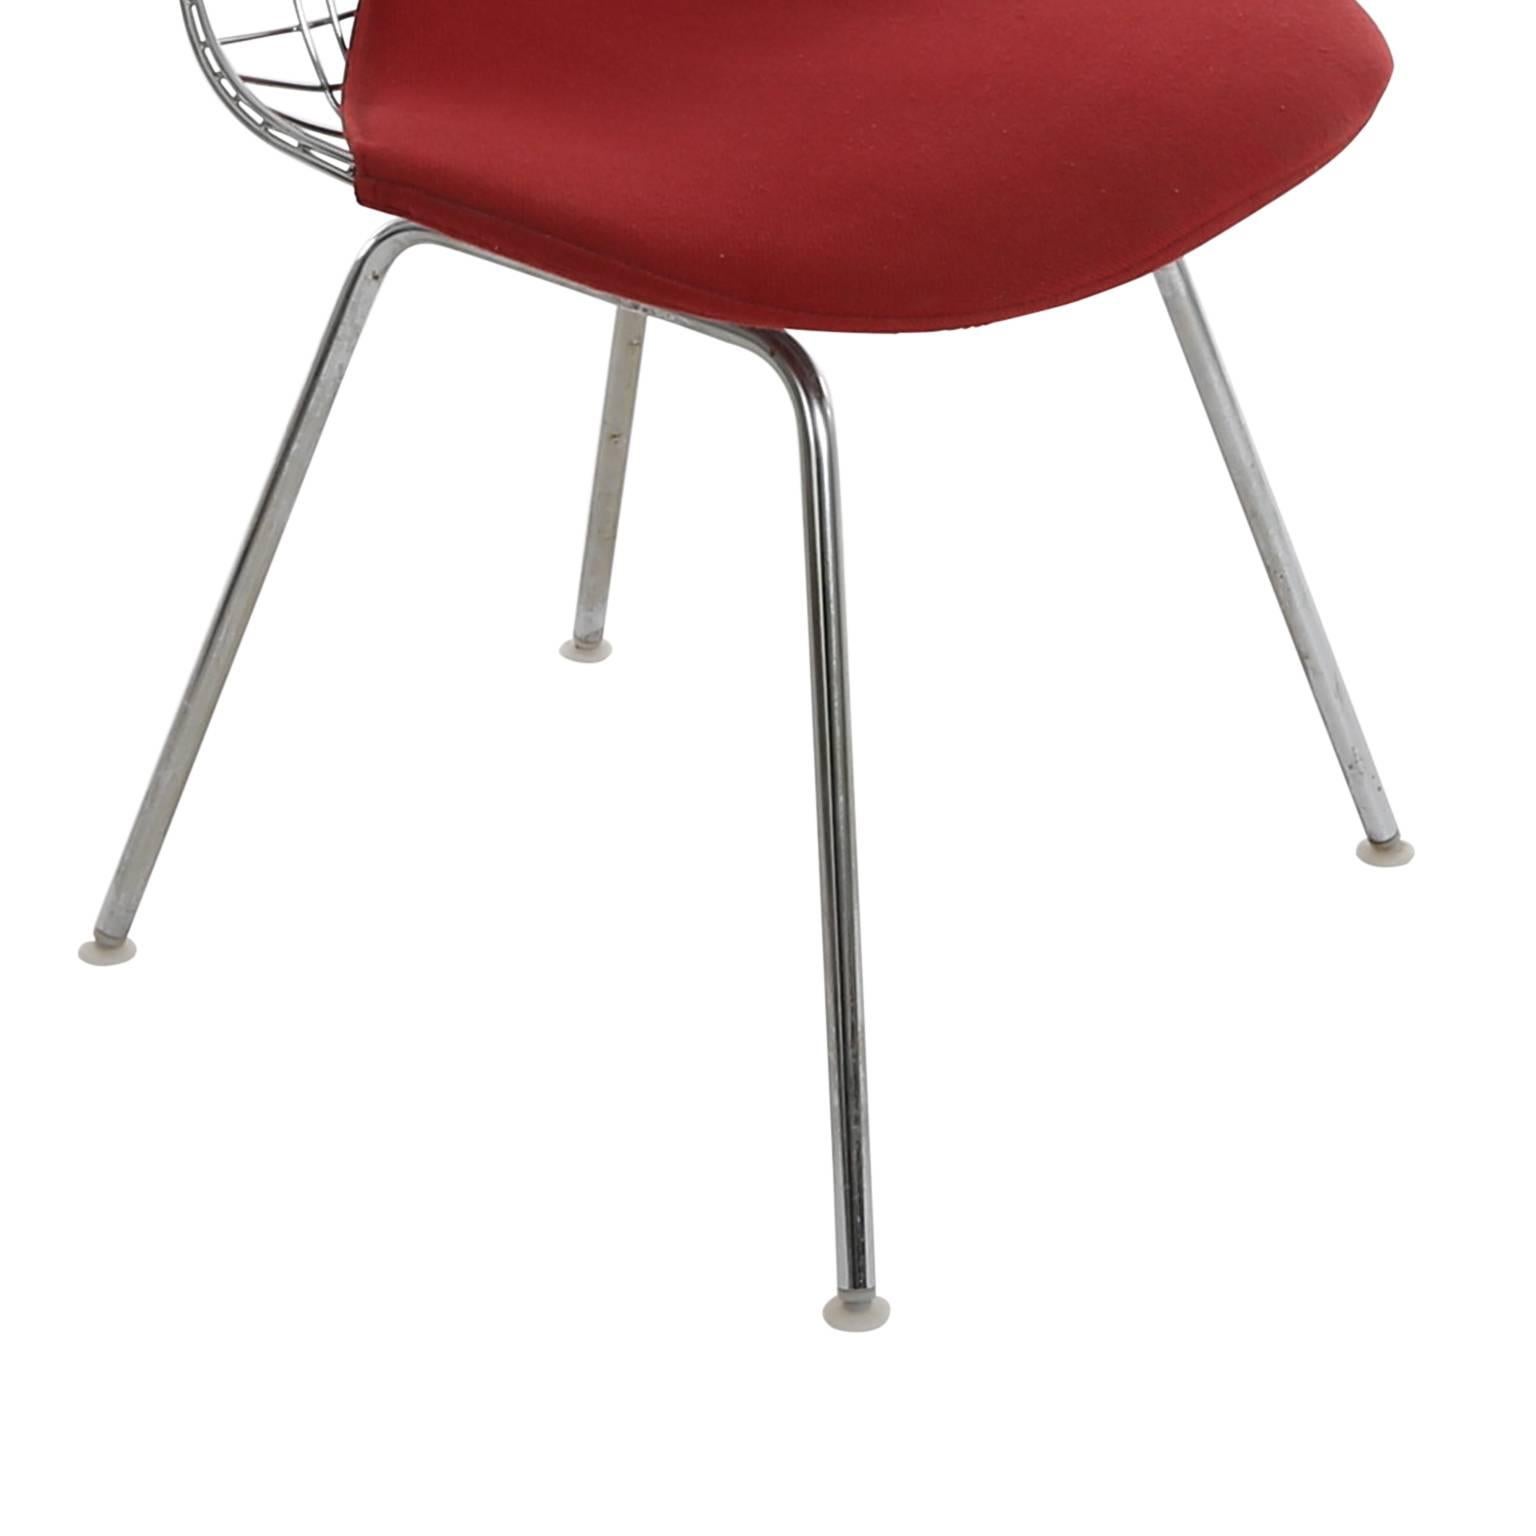 Welded Wire Chair DKX 5 by Ray & Charles Eames with Red Bikini Cover Designed in 1951 For Sale